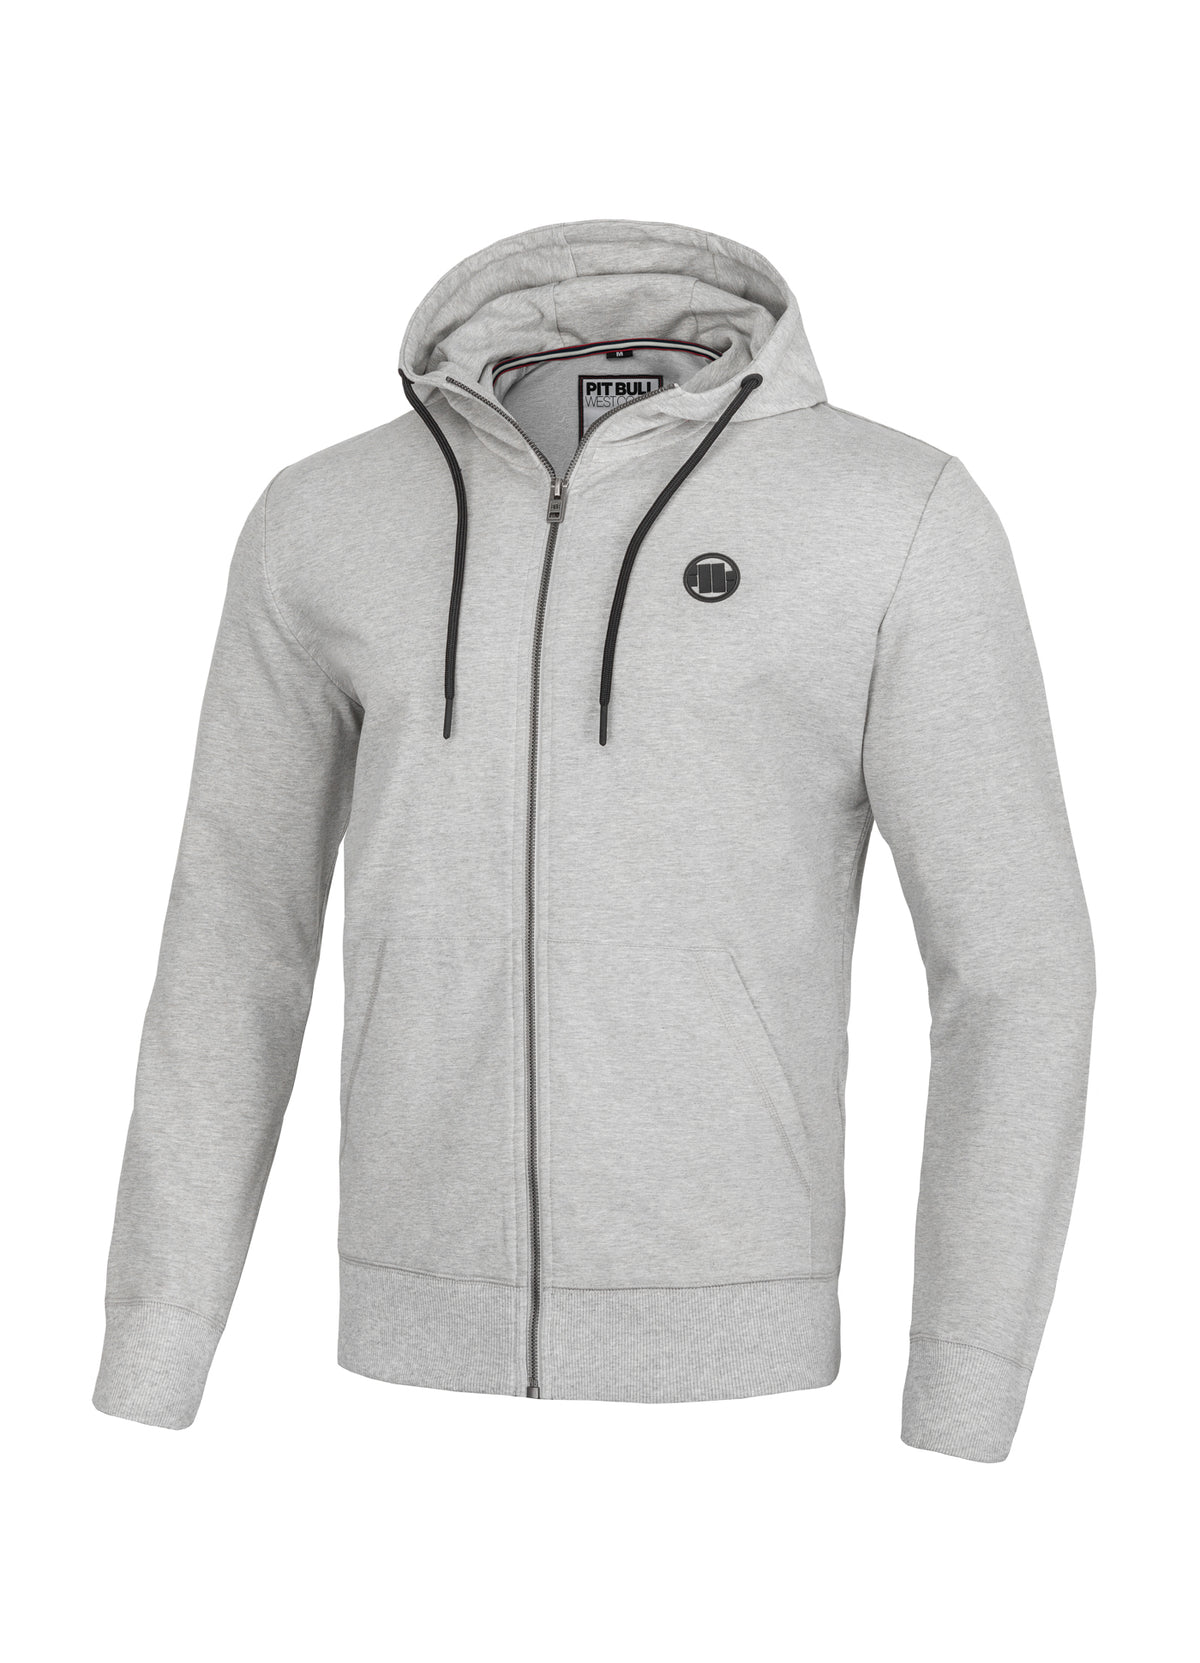 SMALL LOGO FRENCH TERRY 220 GREY ZIP UP HOODIE.